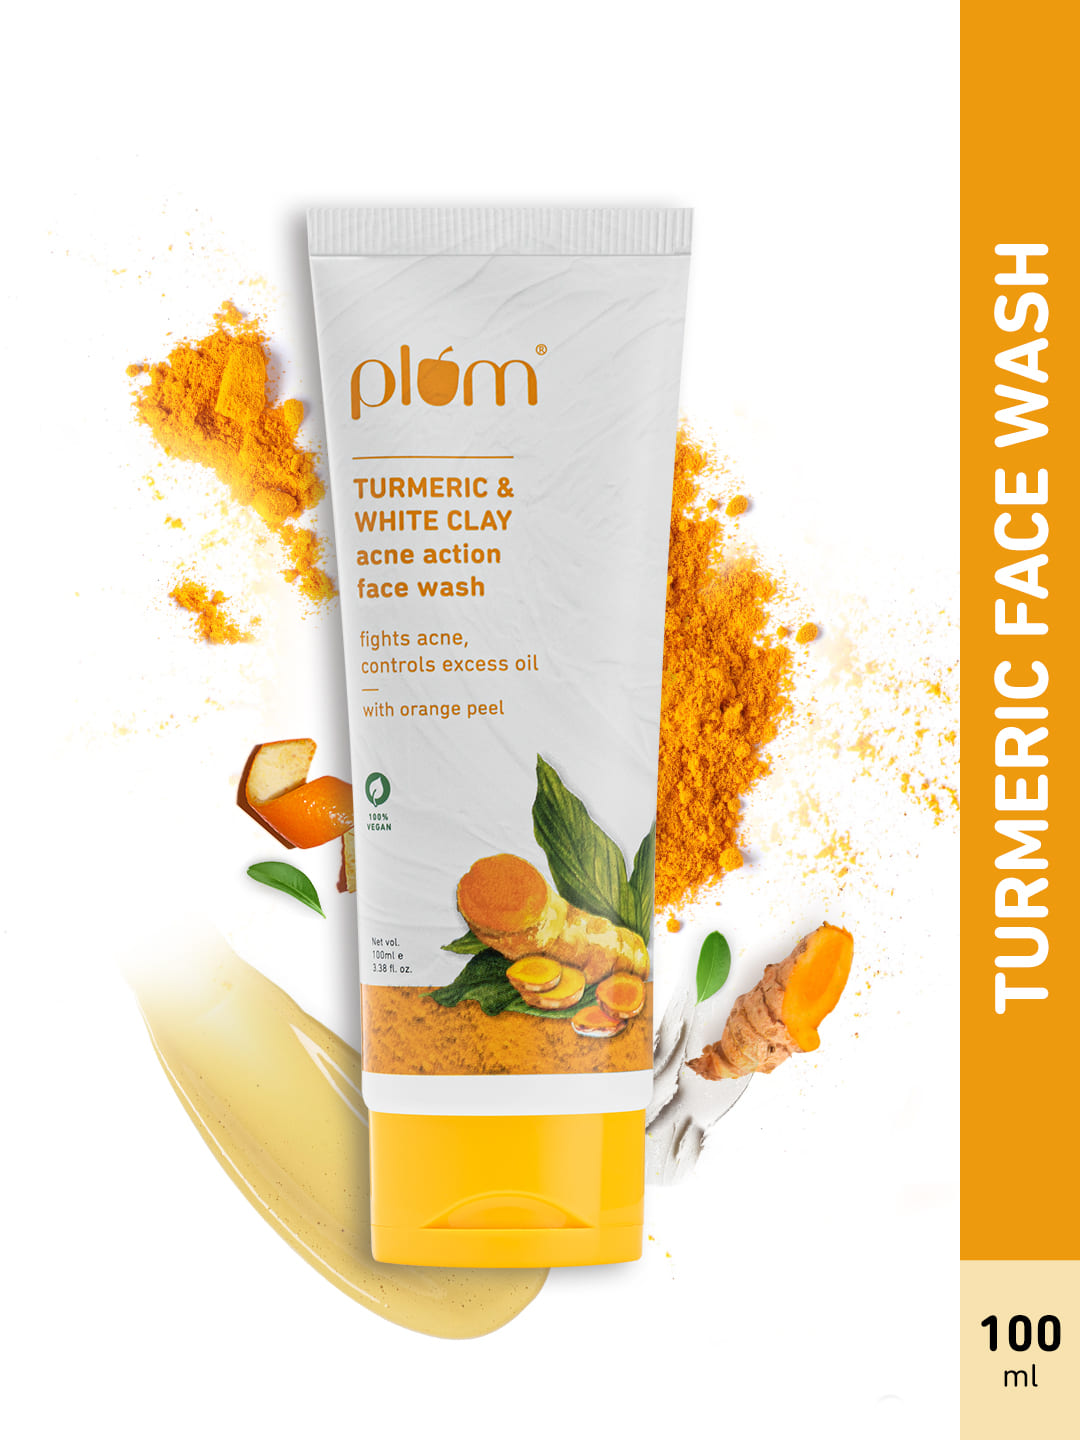 Plum Face Wash | Acne Action | Turmeric & White Clay | Non-Drying | 100ml